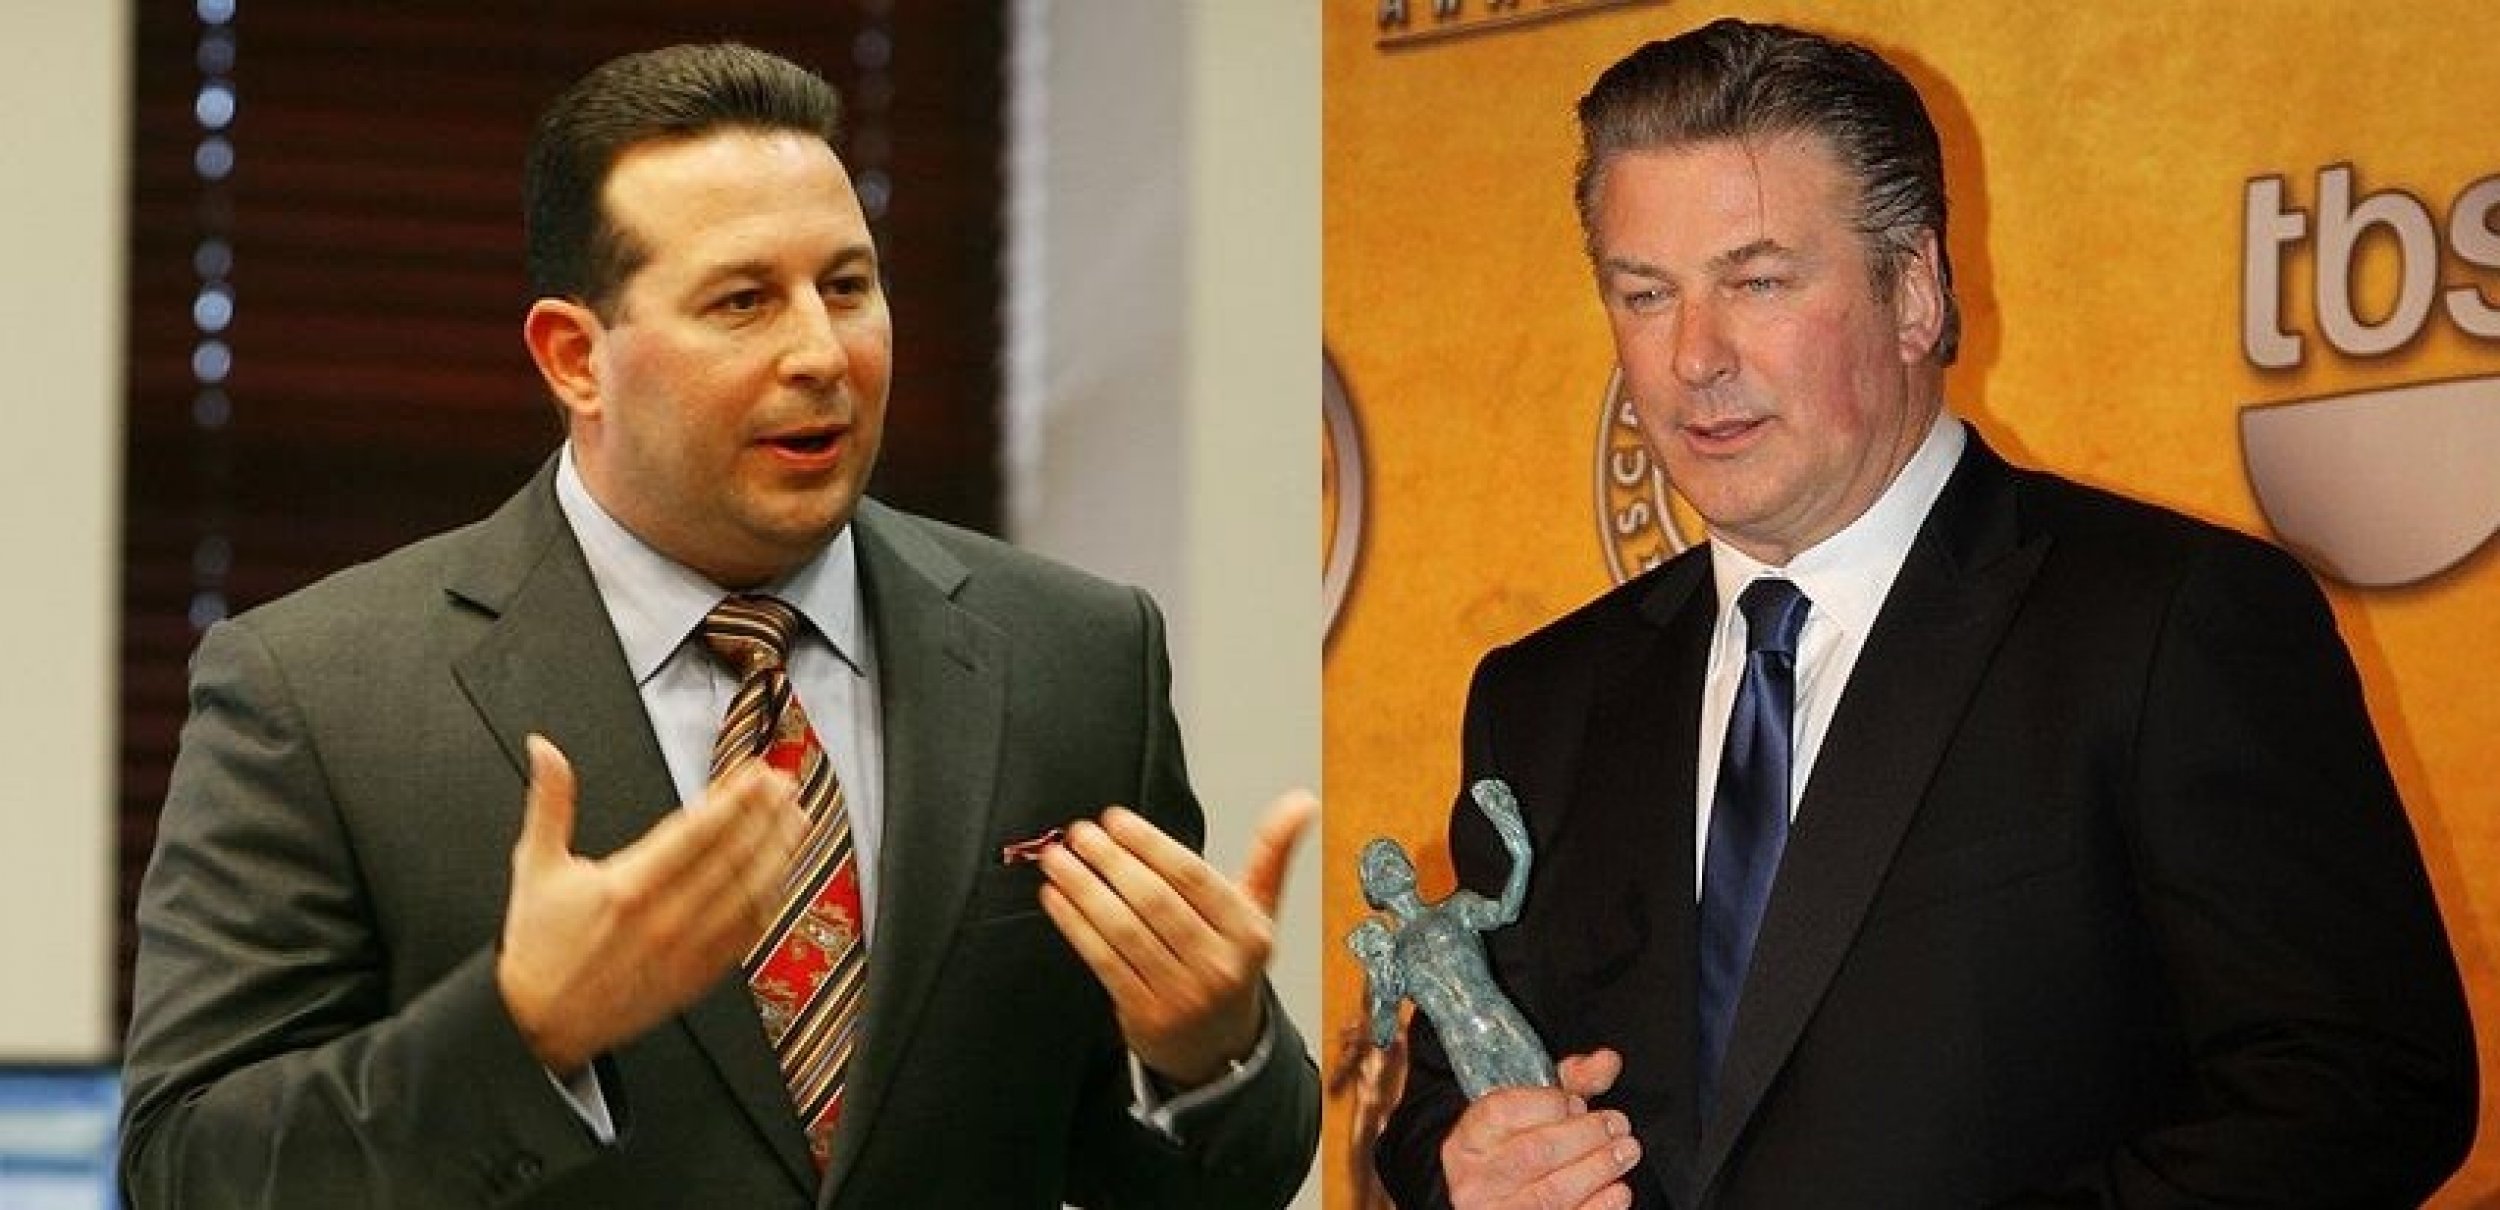 Alec Baldwin as Jose Baez, lead attorney for Casey Anthony